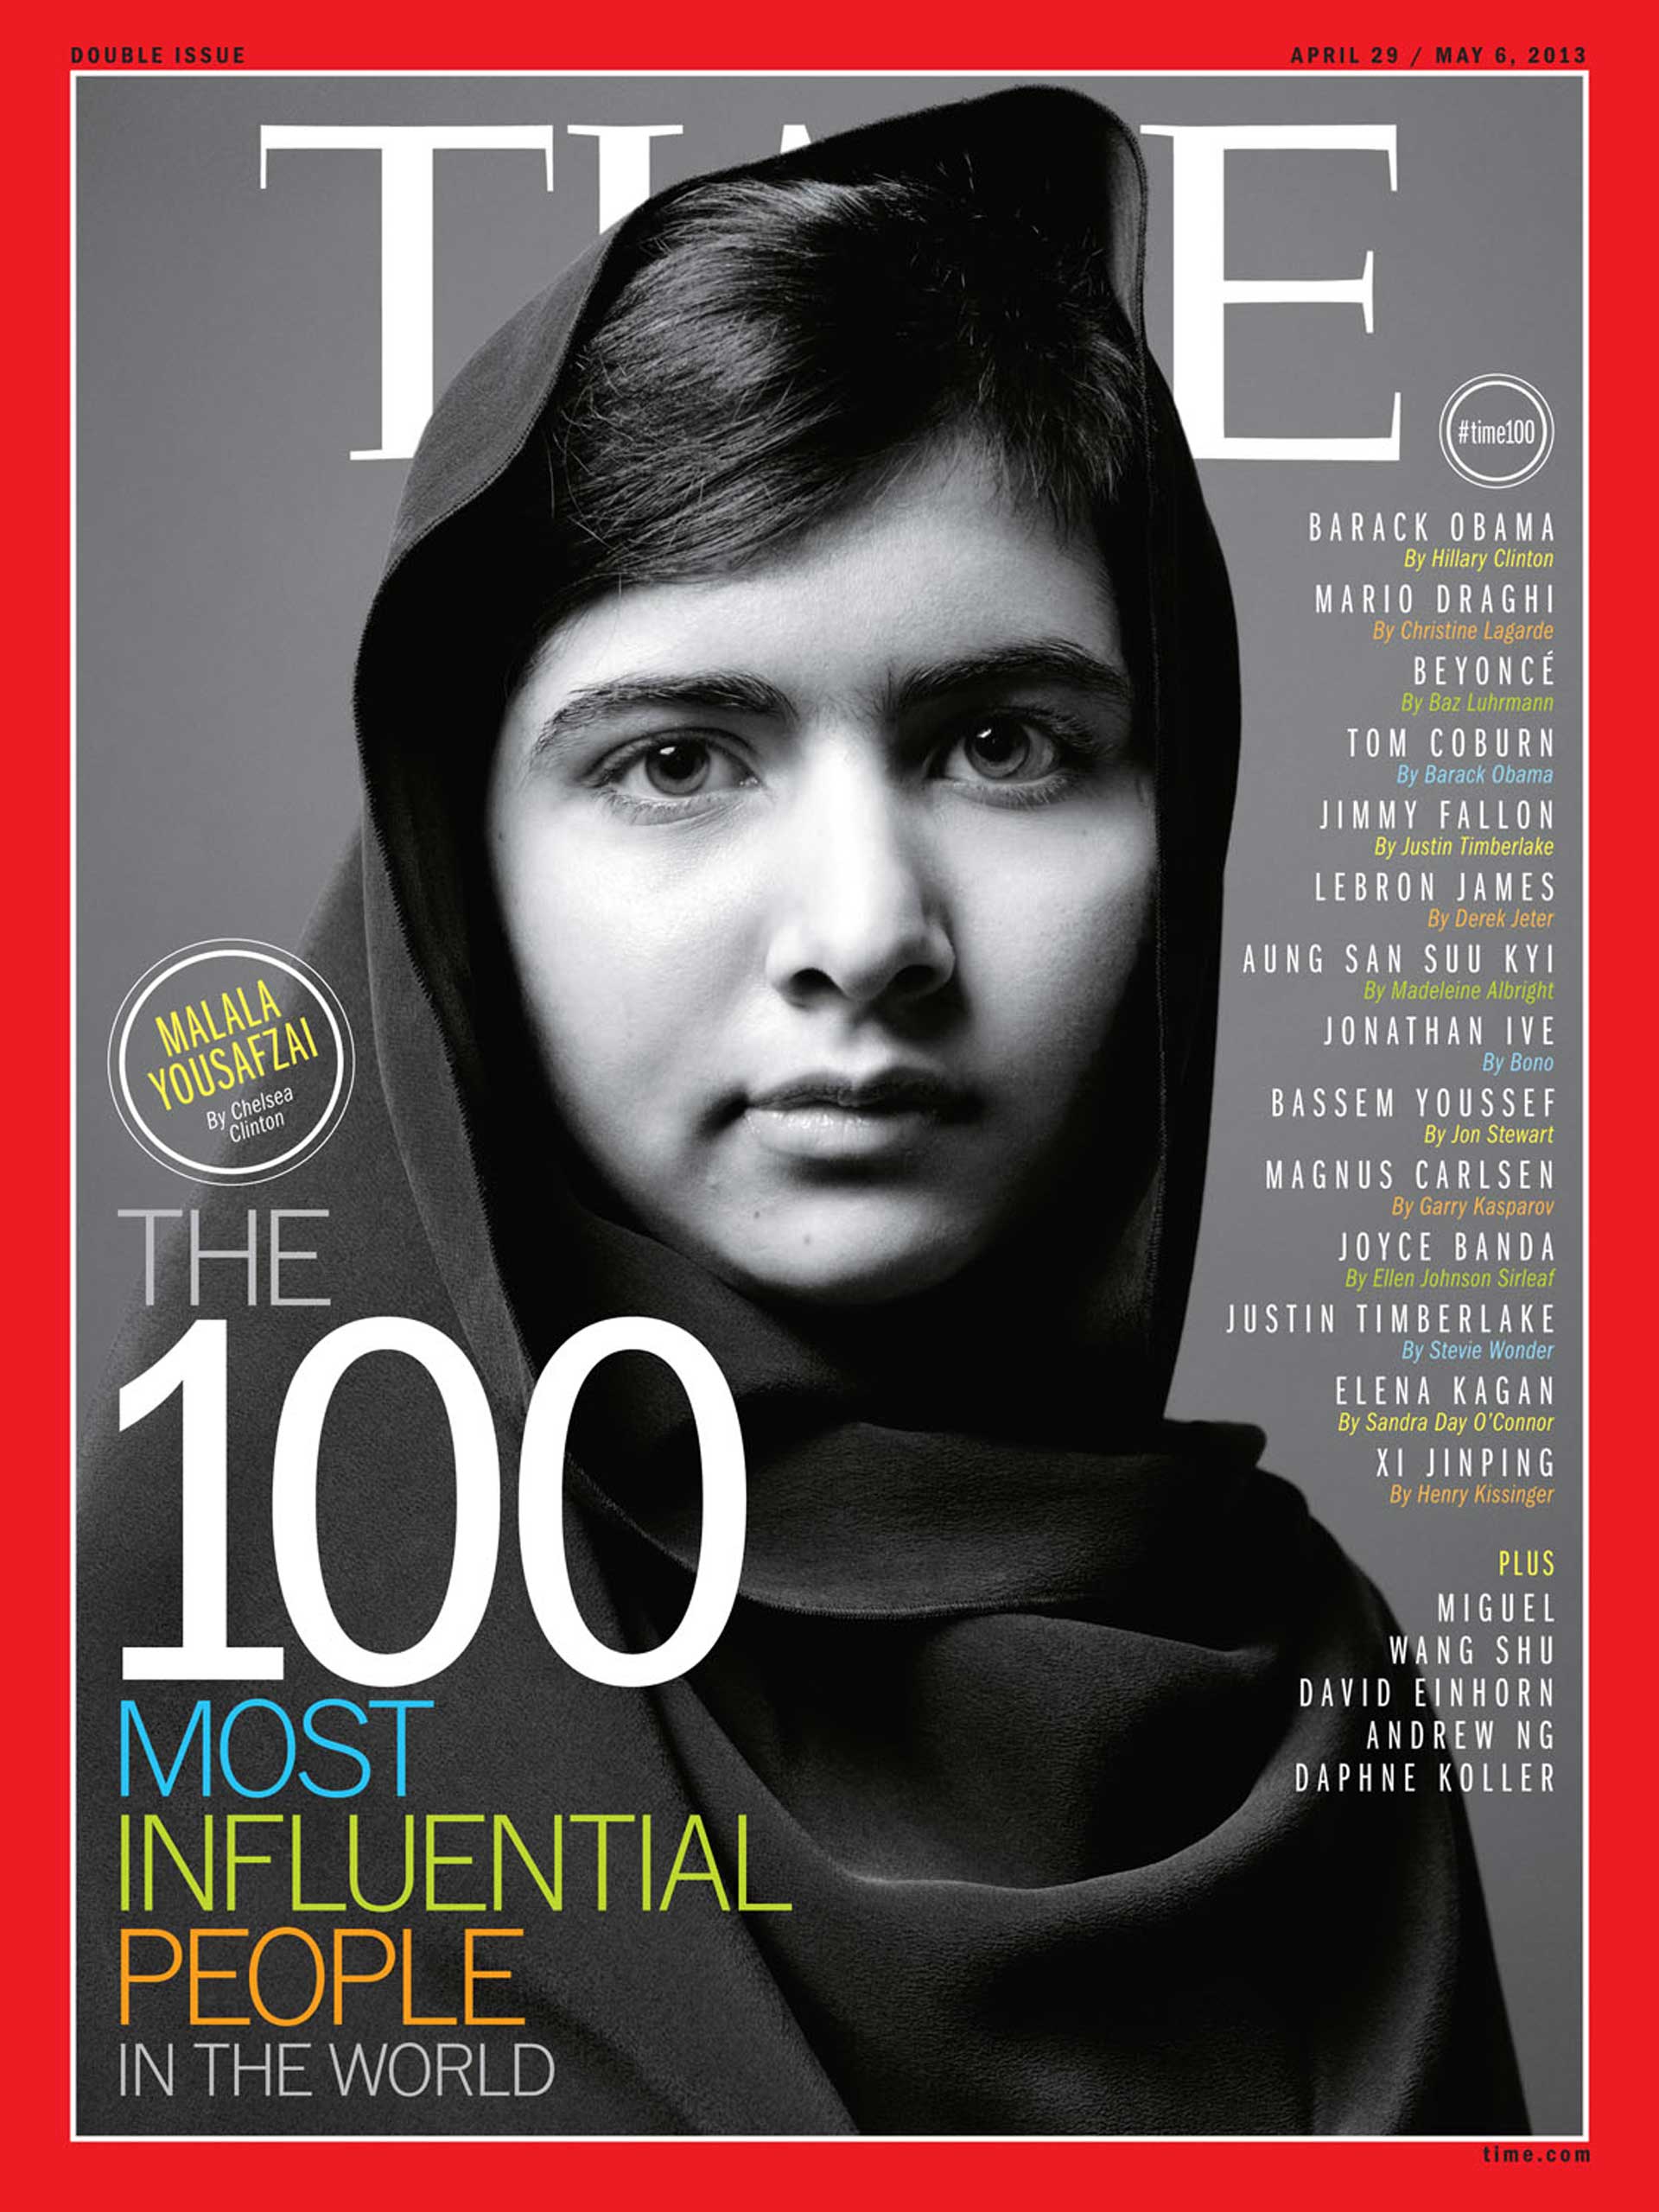 Malala Yousafzai was on the cover of TIME Magazine's 100 Most Influential People list in 2013. (TIME)